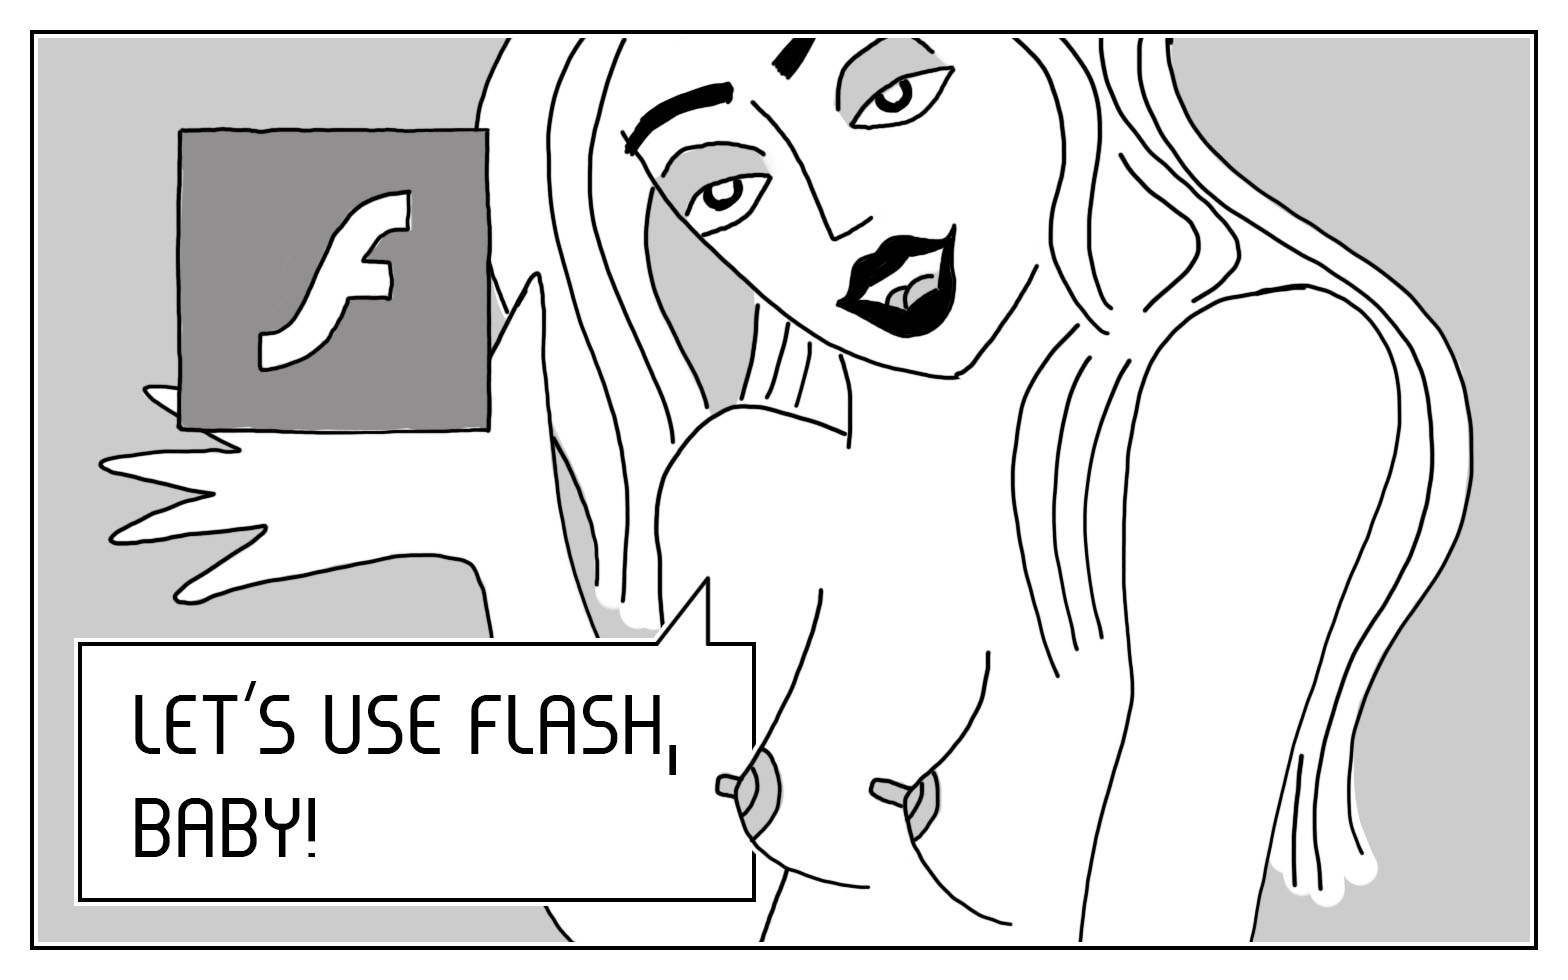 Let's use Flash, Baby!